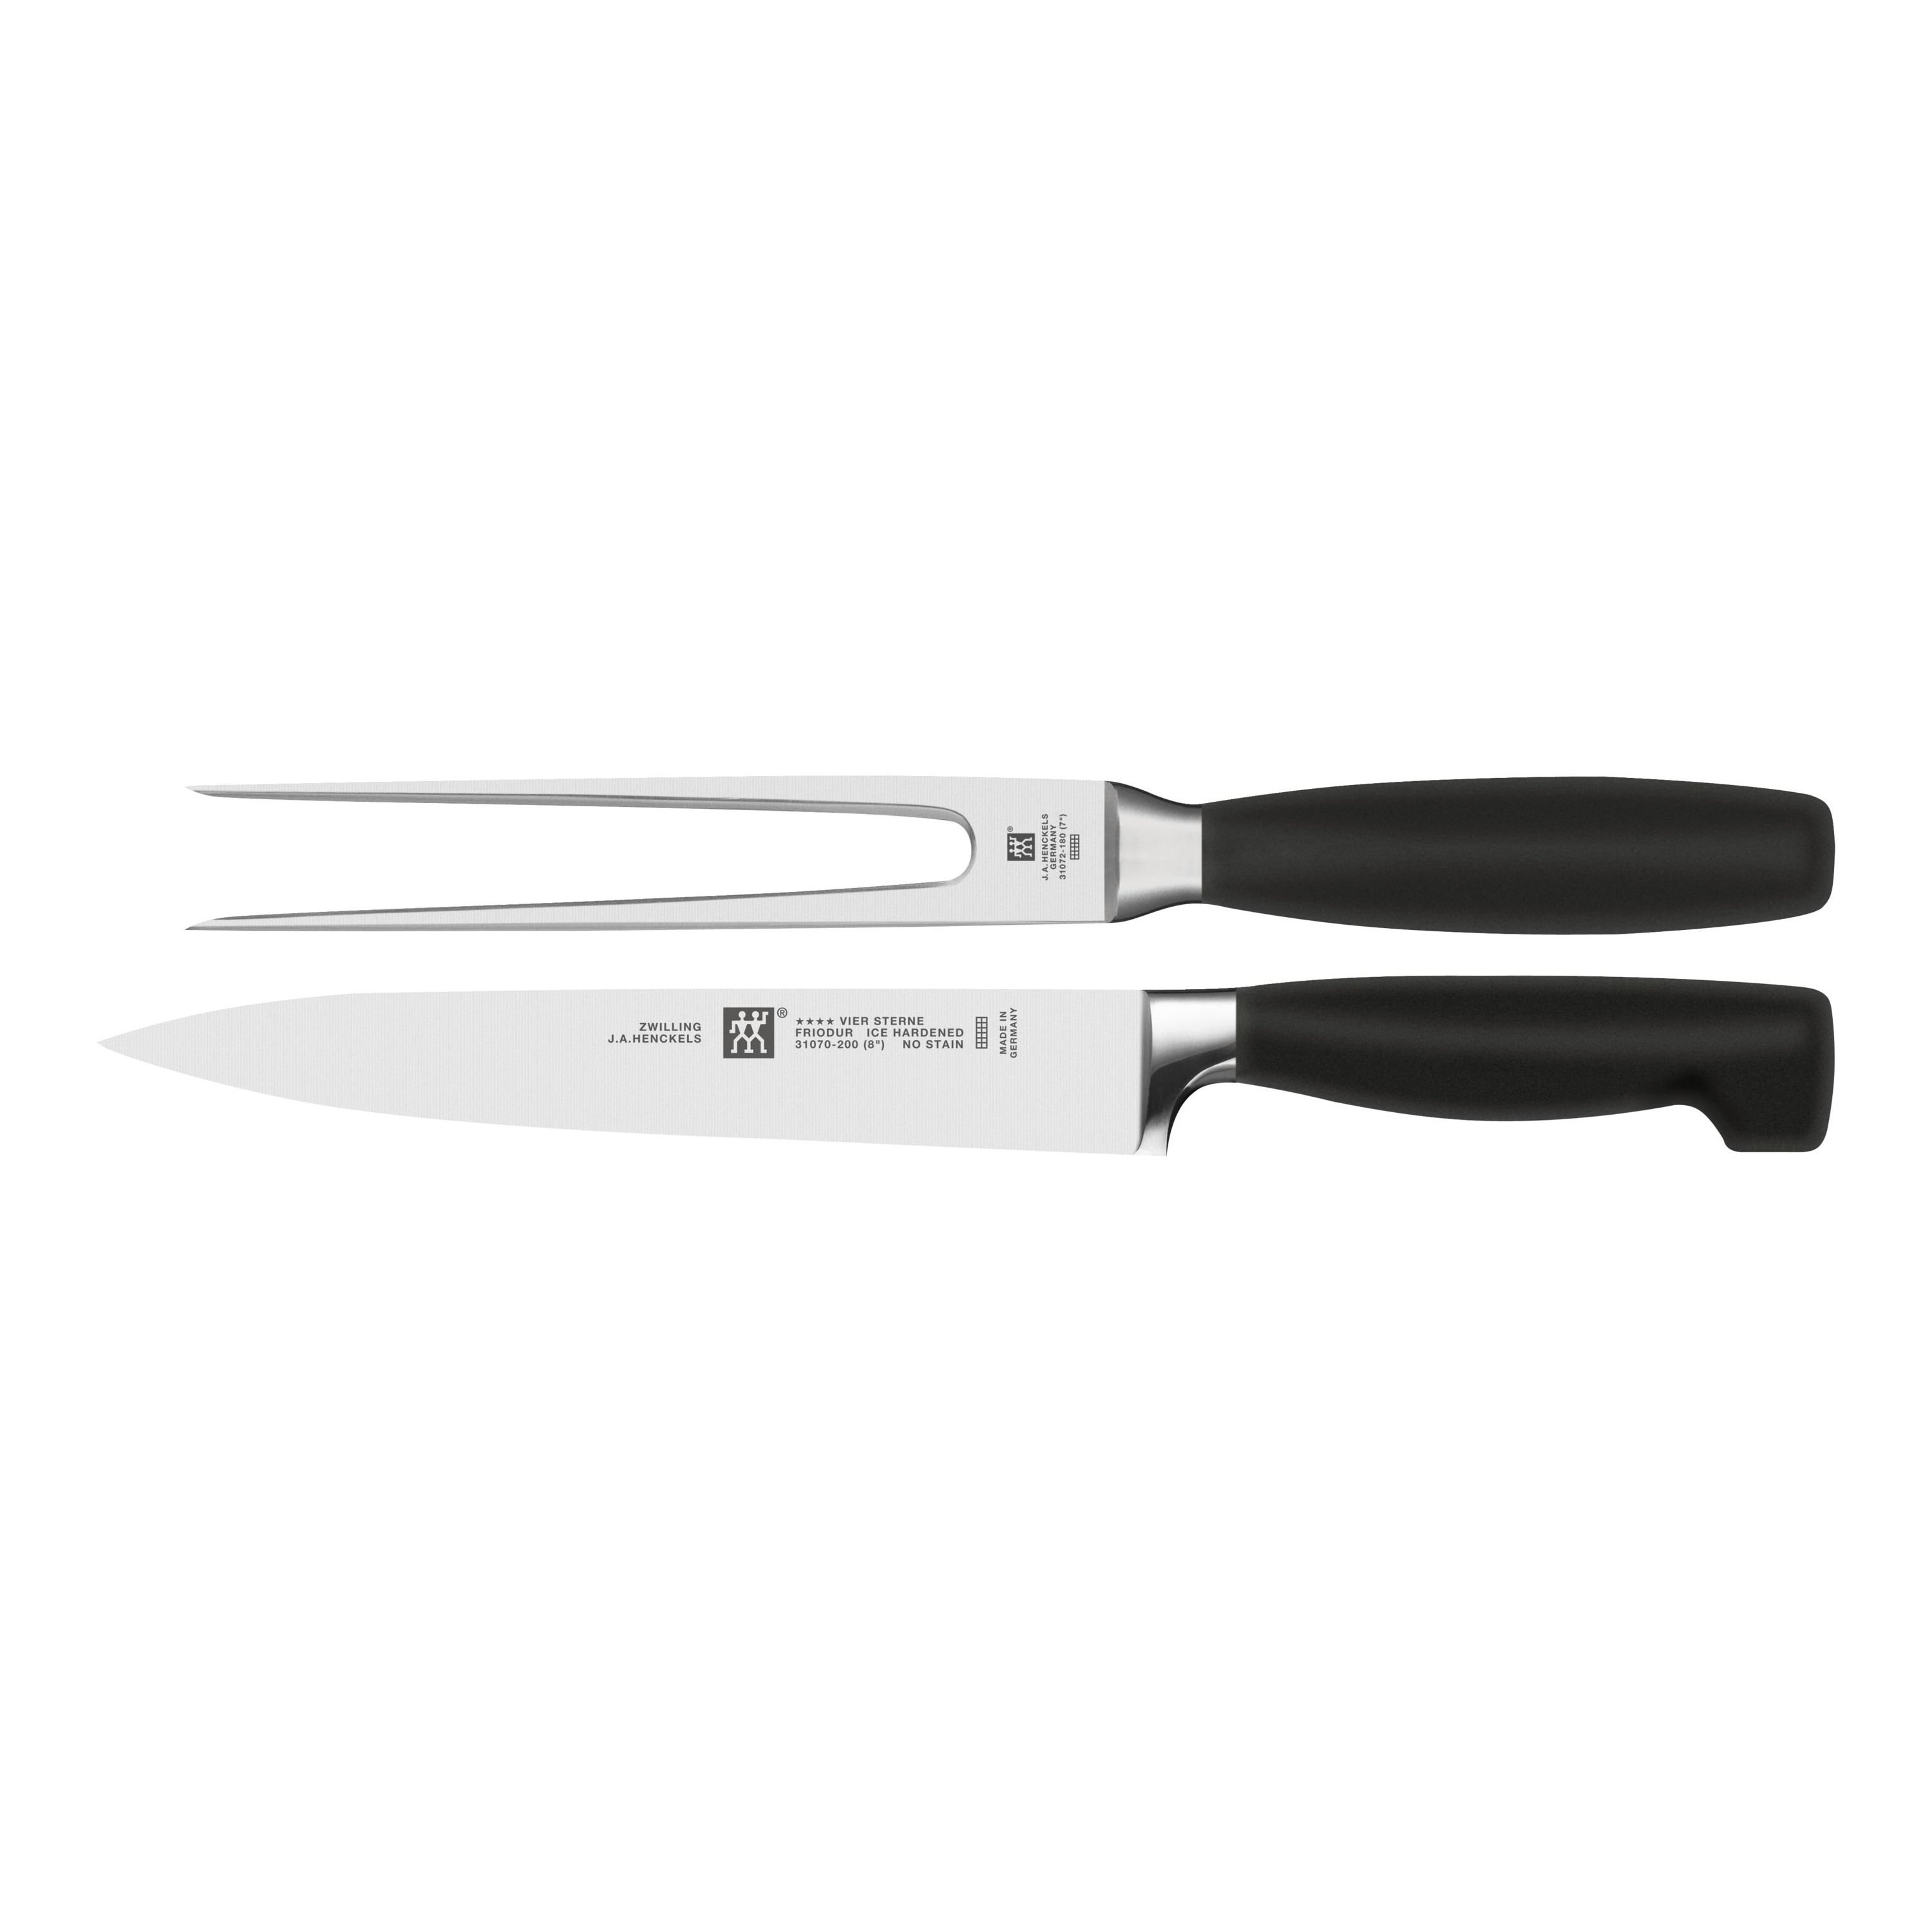 https://www.zwilling.com/on/demandware.static/-/Sites-zwilling-master-catalog/default/dw4ac14a97/images/large/35037-000-0_1.jpg